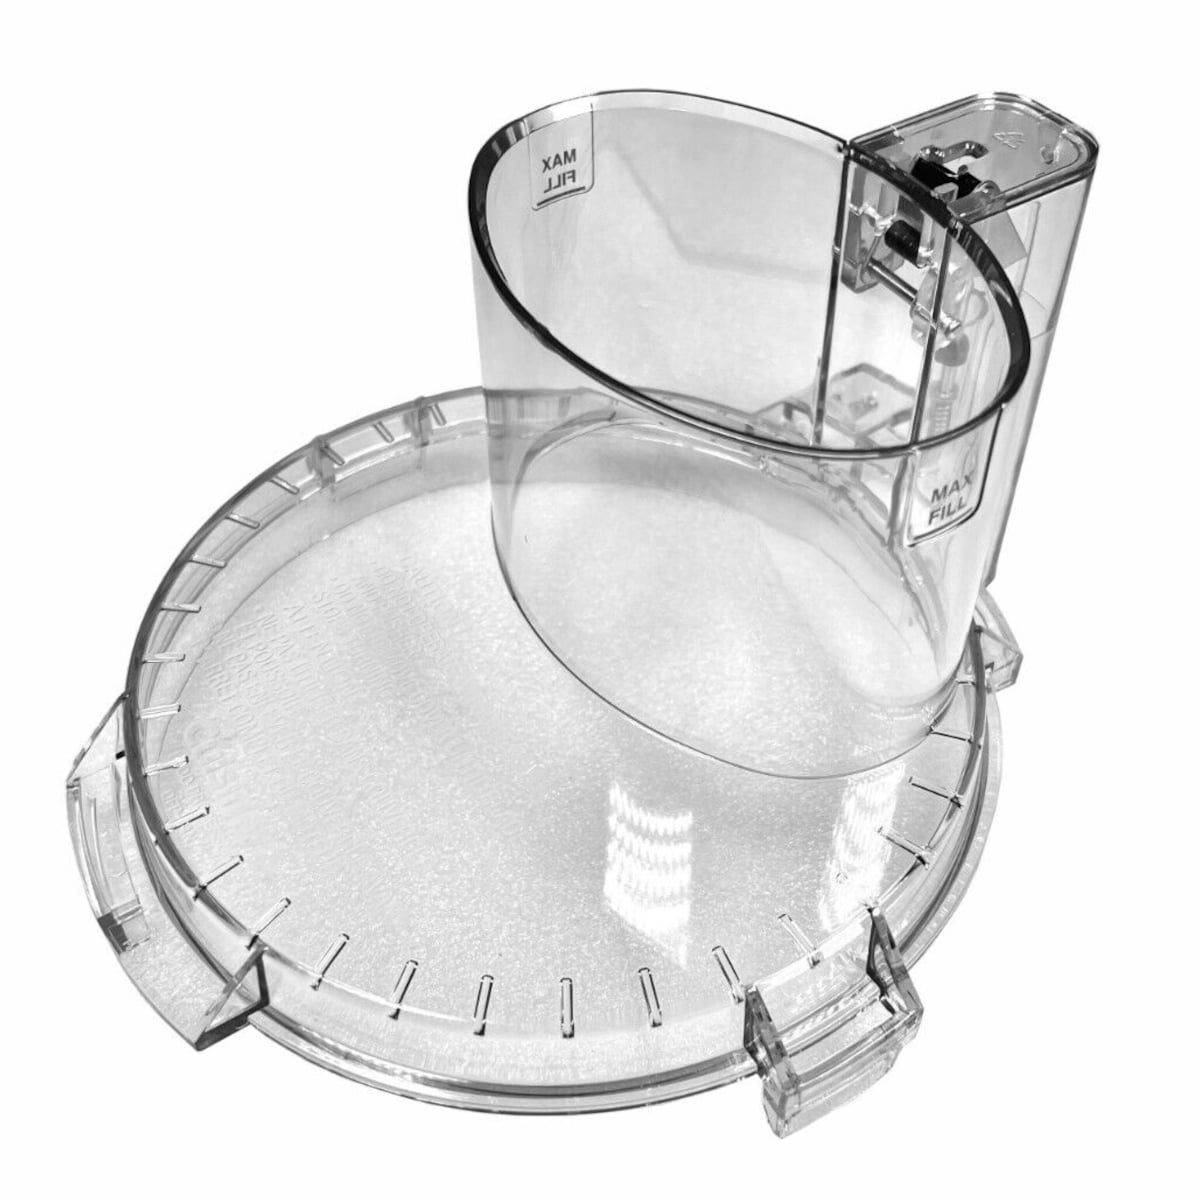 CUISINART BASIC MODEL Food Processor Part - Replacement Bowl Cover